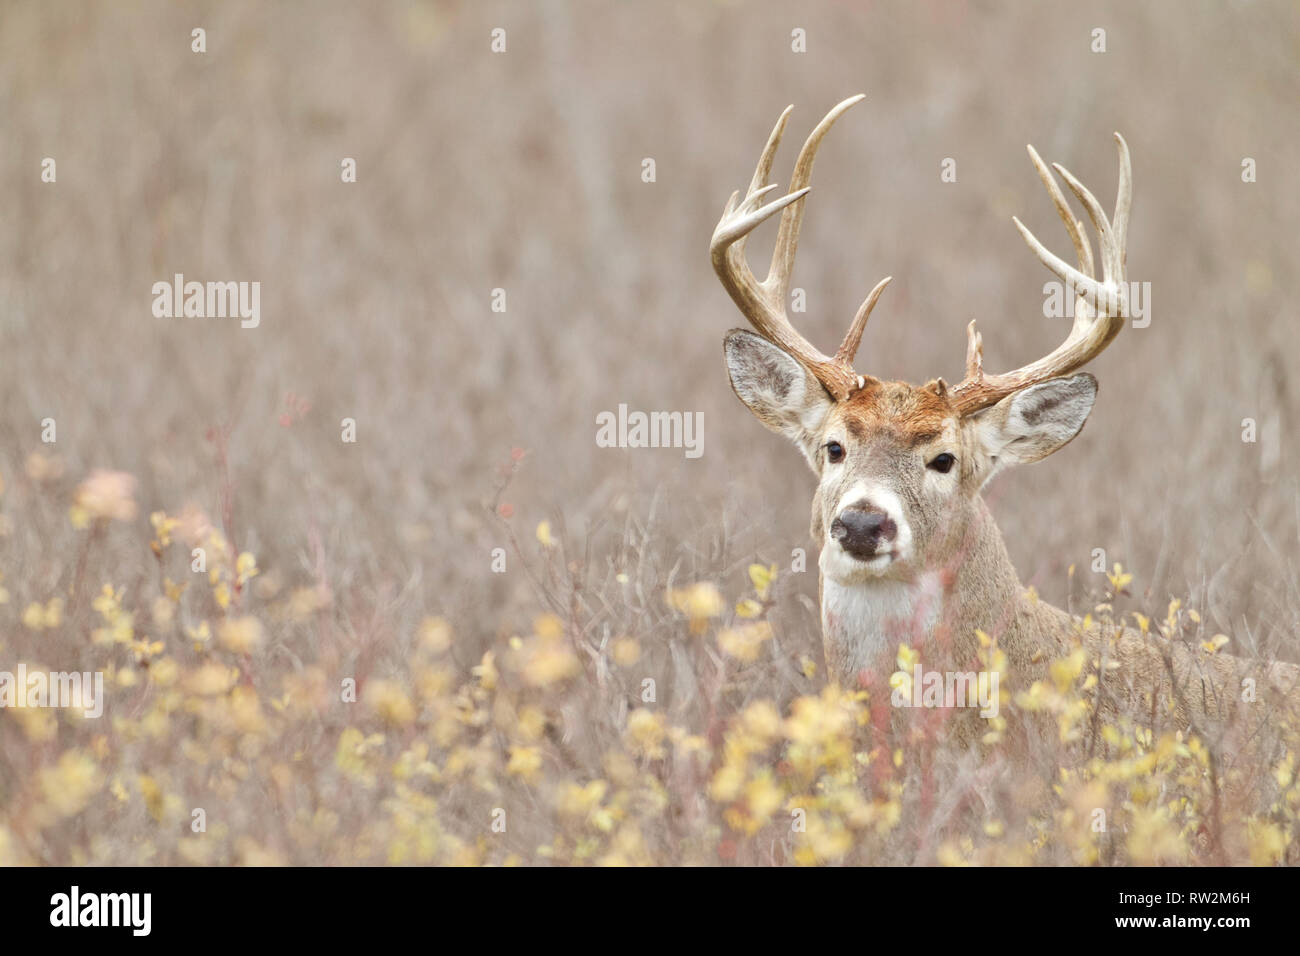 Mature Whitetail Deer buck in fall colors during the autumn breeding season Stock Photo